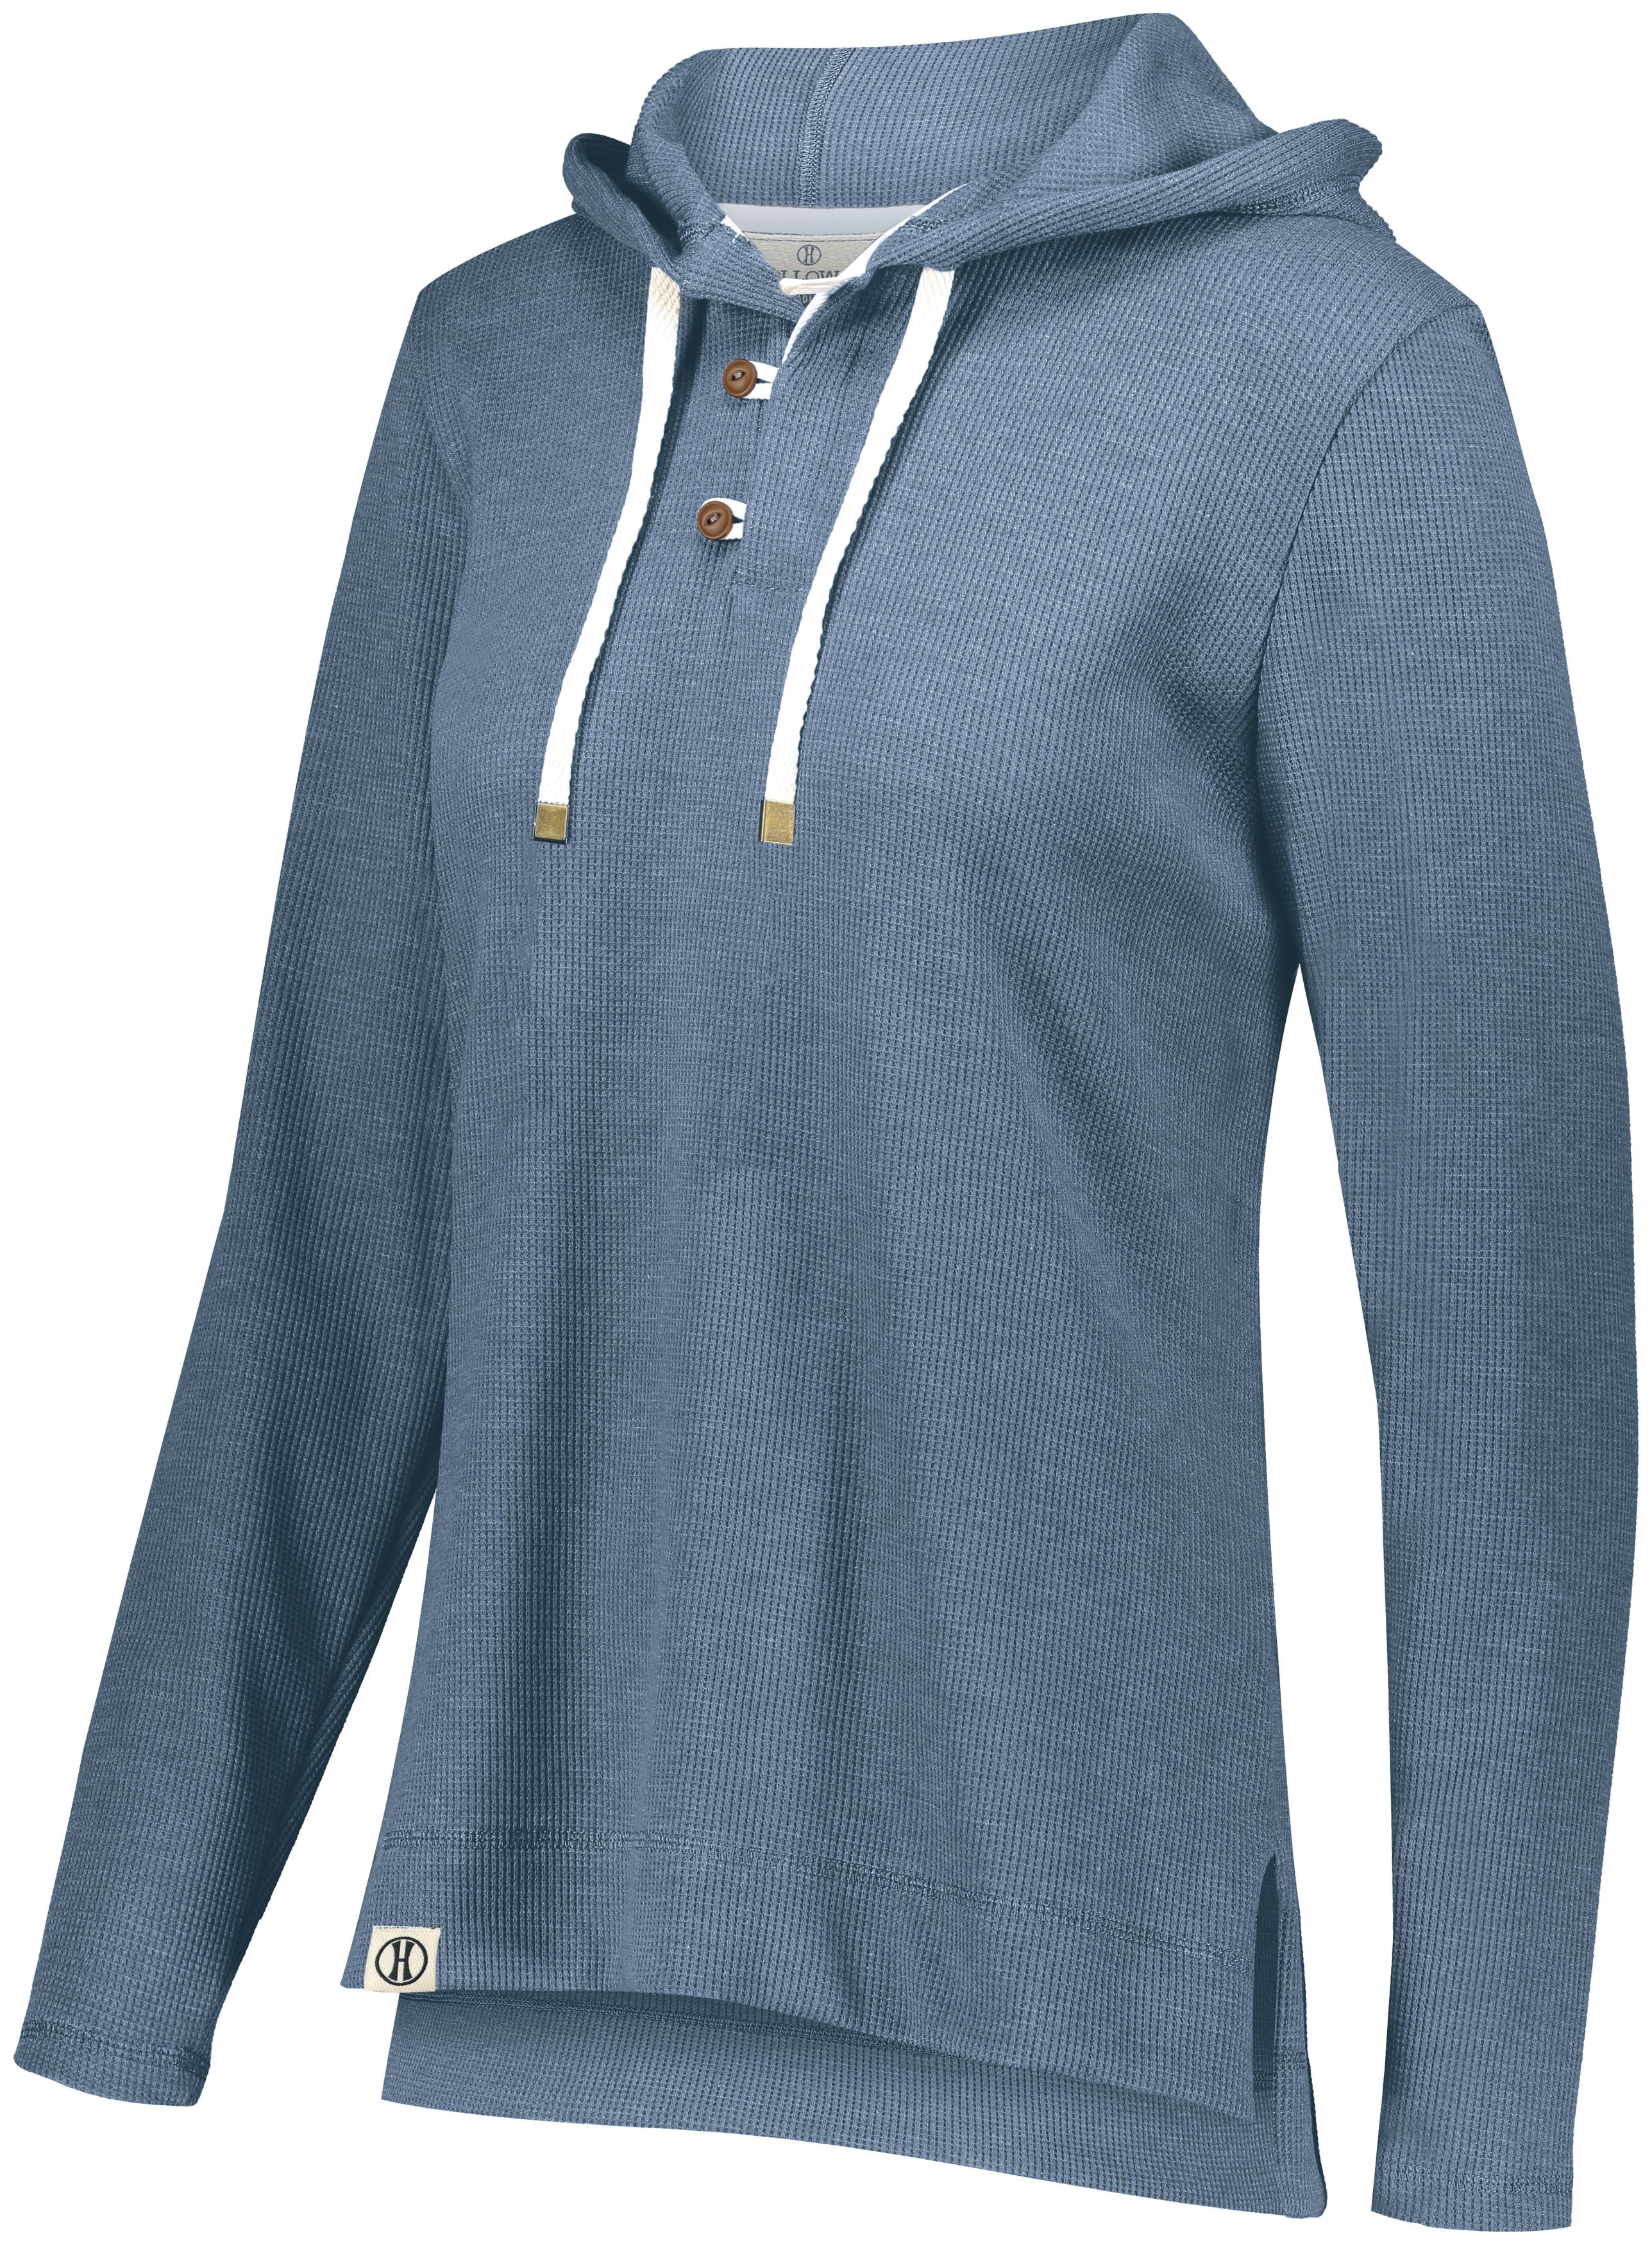 Holloway Ladies Coast Hoodie in Storm Heather  -Part of the Ladies, Holloway, Shirts product lines at KanaleyCreations.com